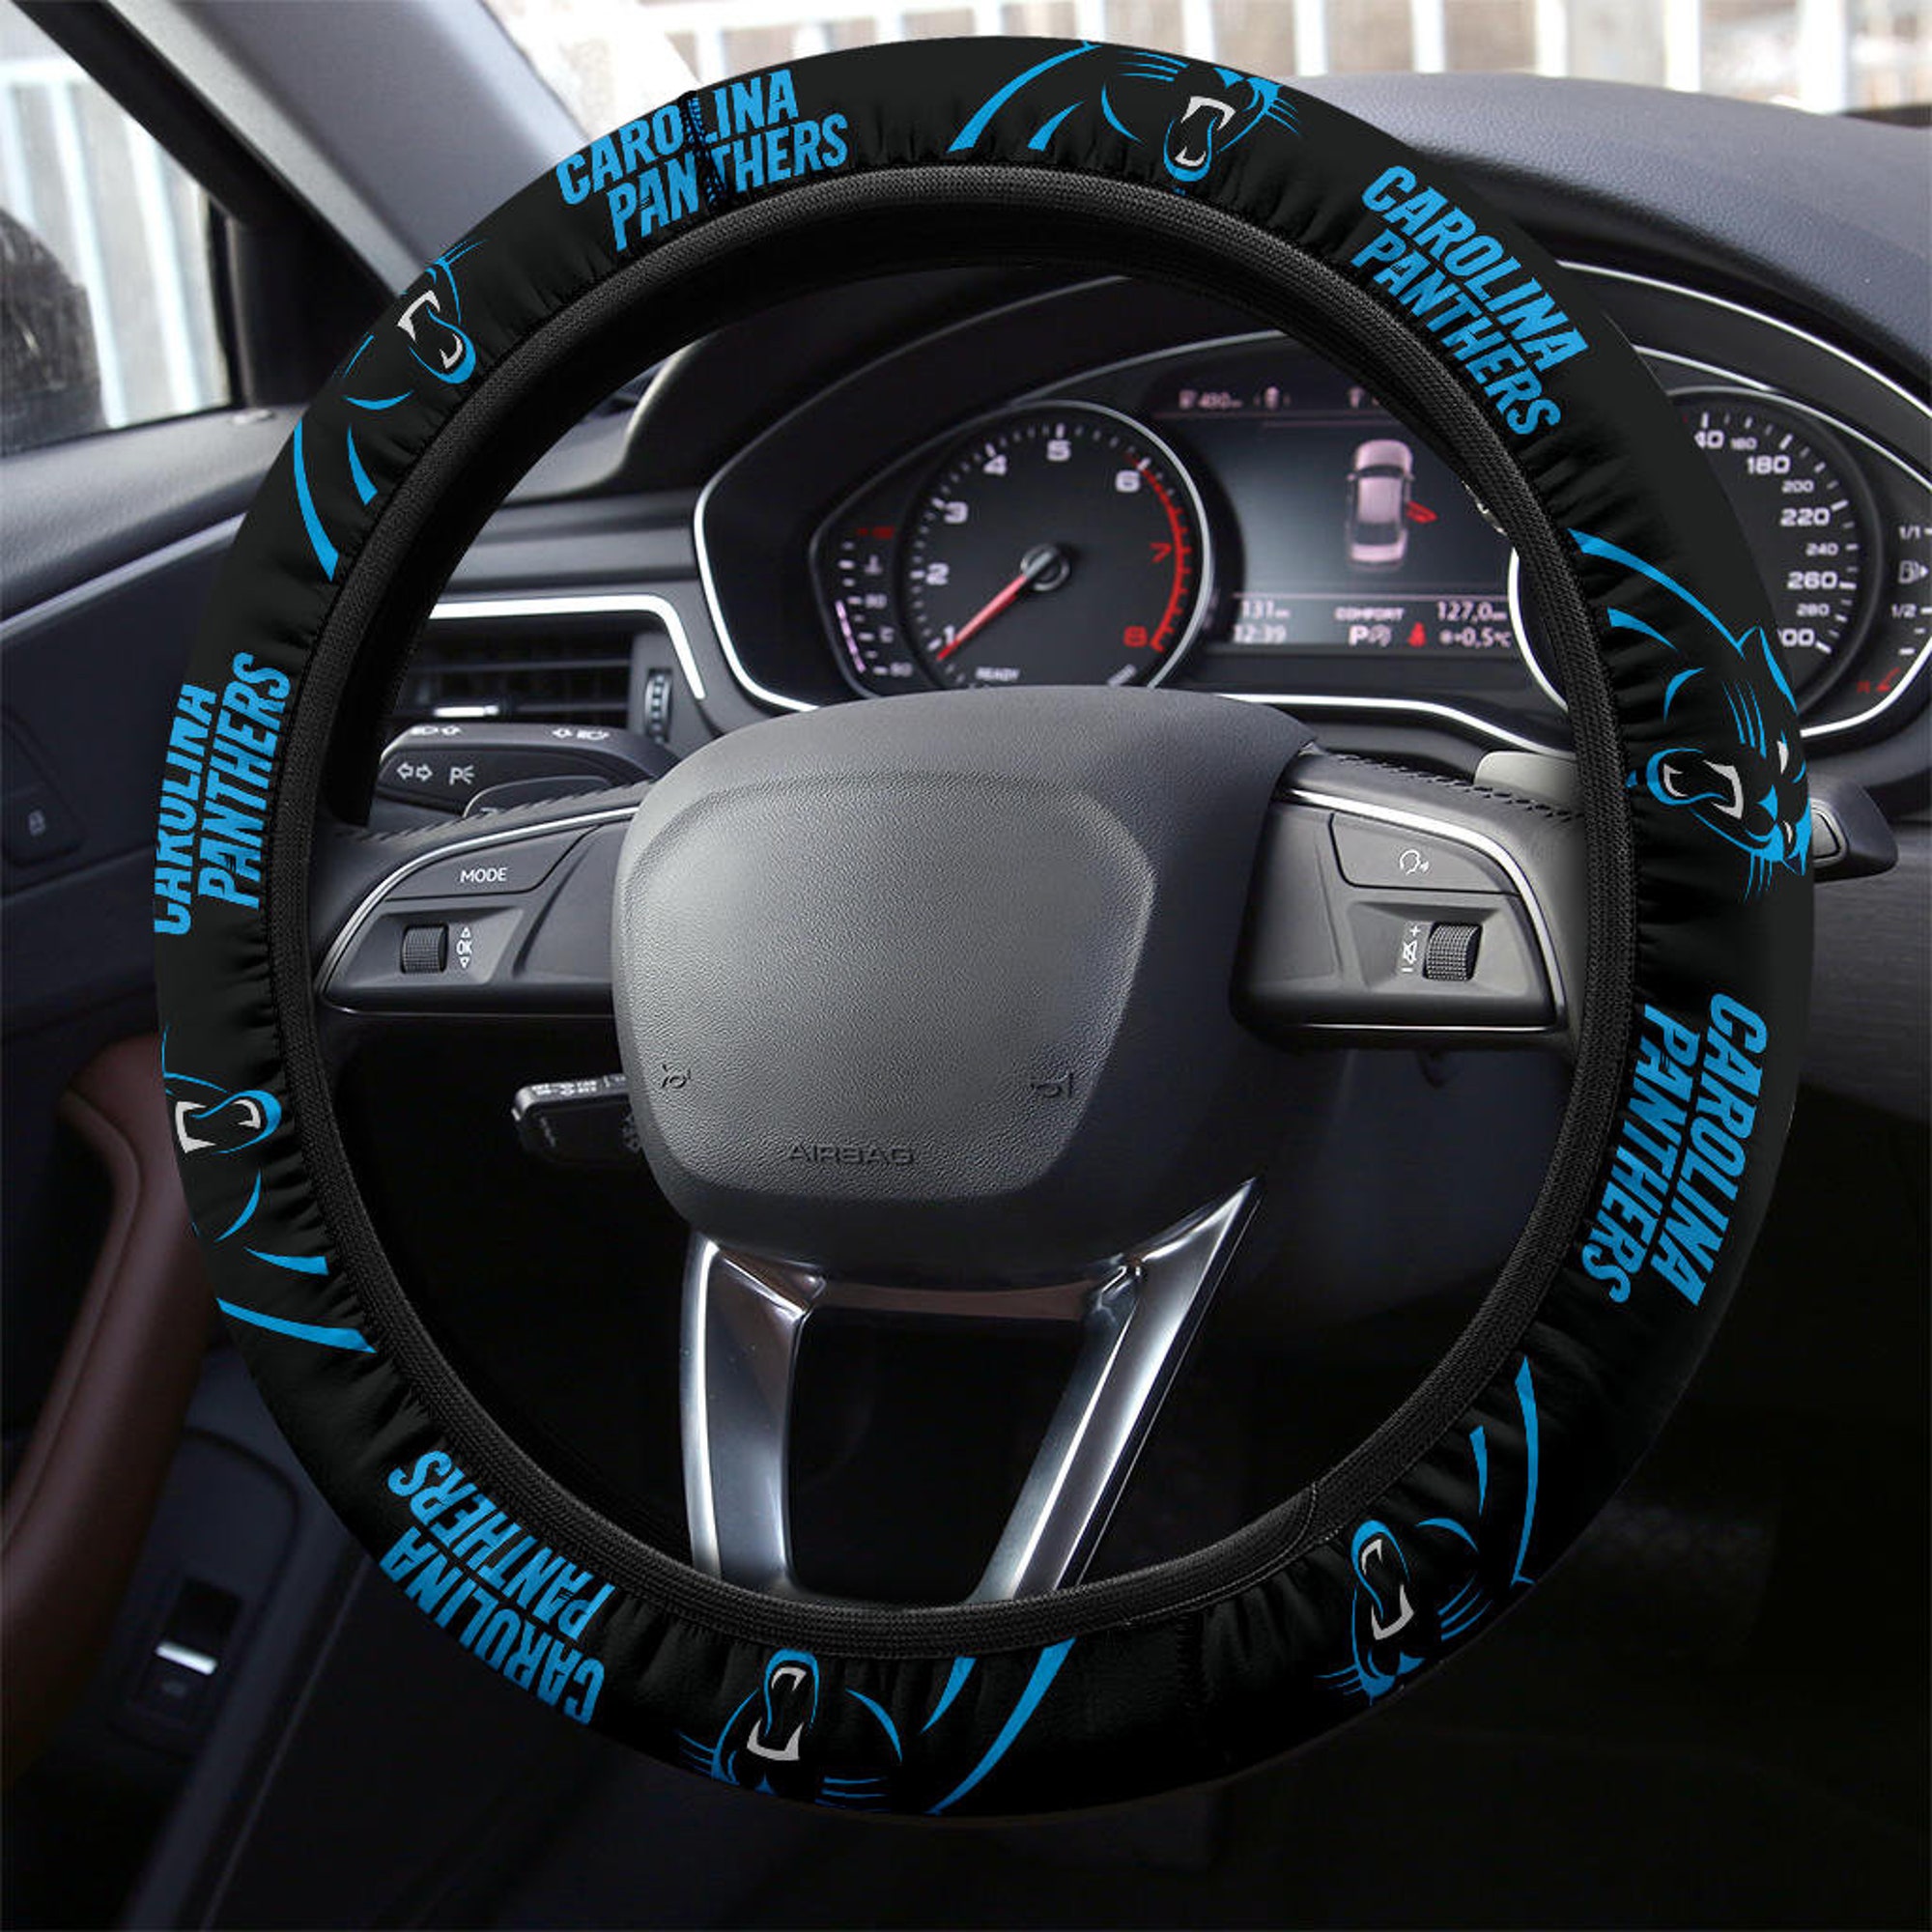 Carolina Panthers themed custom steering wheel cover for a fan